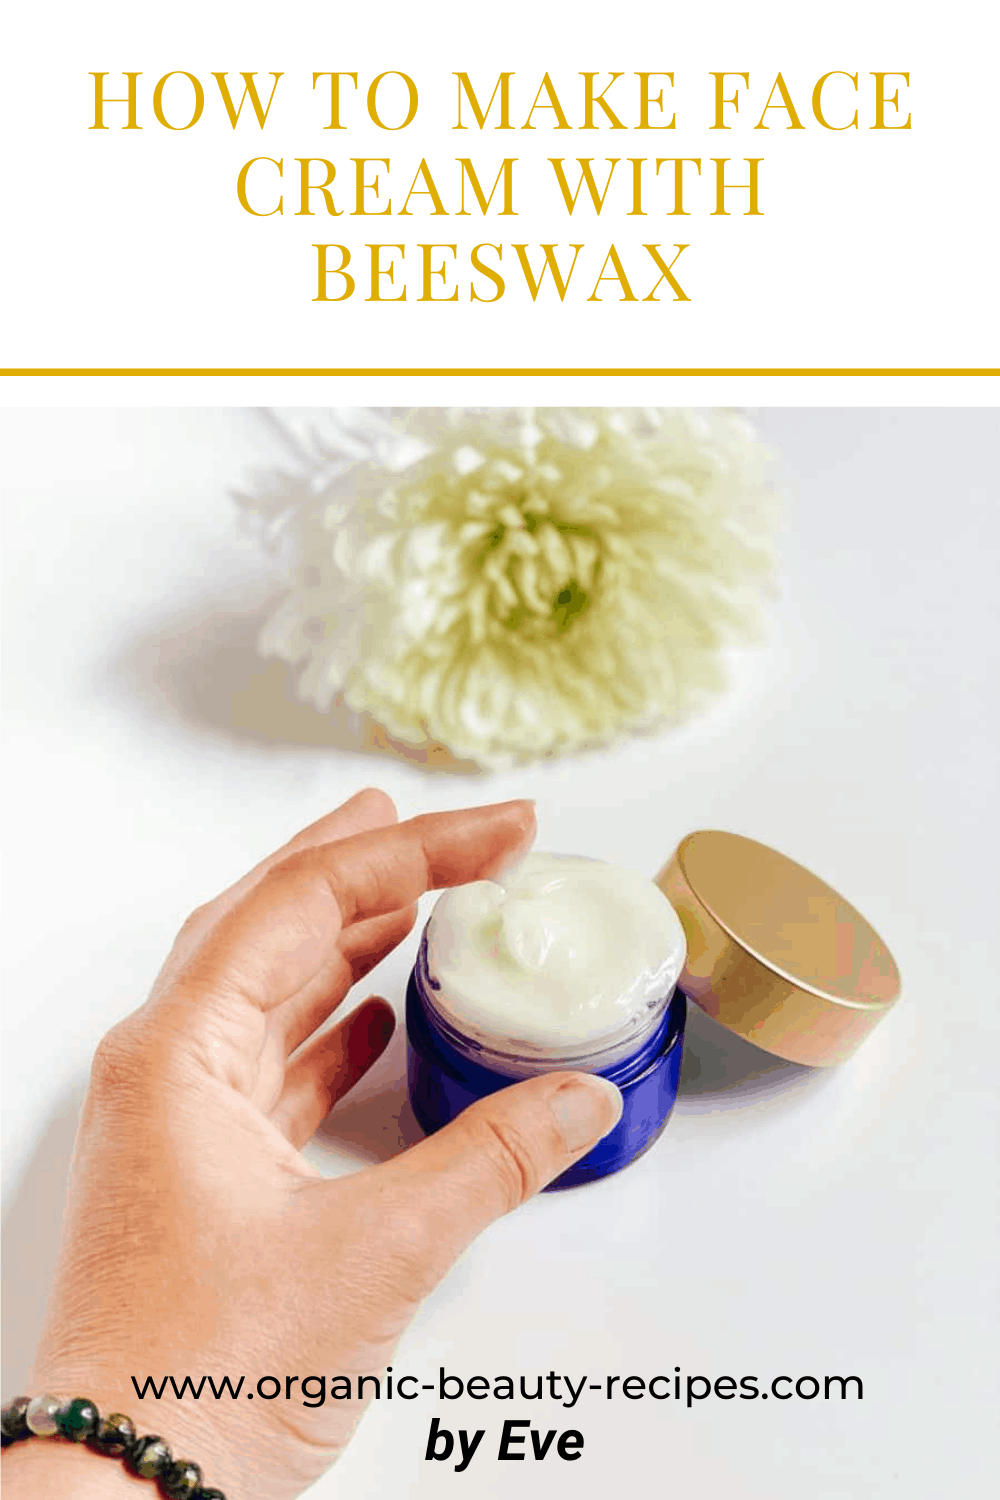 How To Make Face Cream With Beeswax